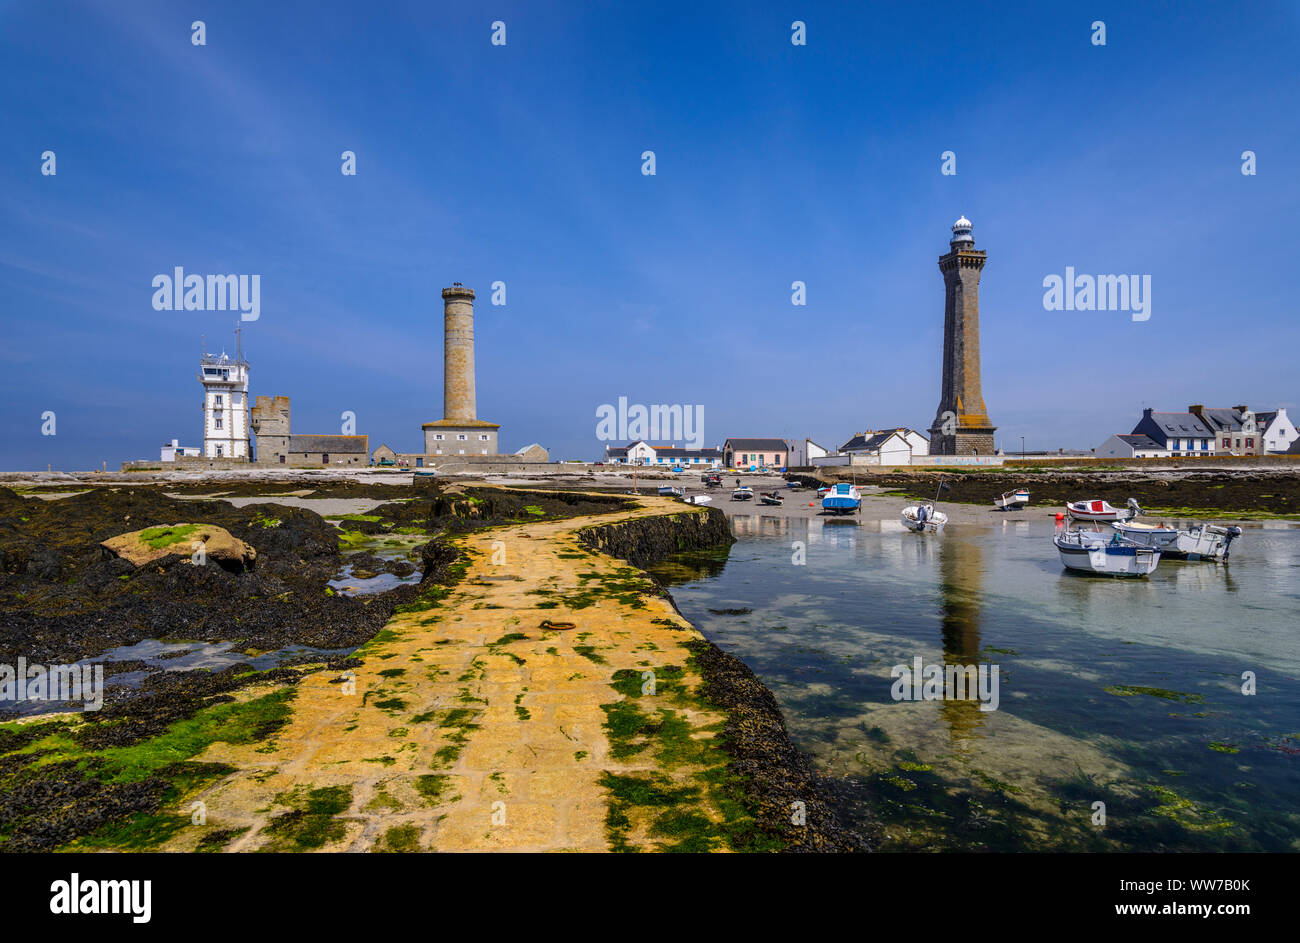 France, Brittany, FinistÃ¨re Department, Penmarc'h, Pointe de Penmarc'h with Chapel of Saint Peter, Vieux Phare and Phare d'EckmÃ¼hl lighthouses Stock Photo